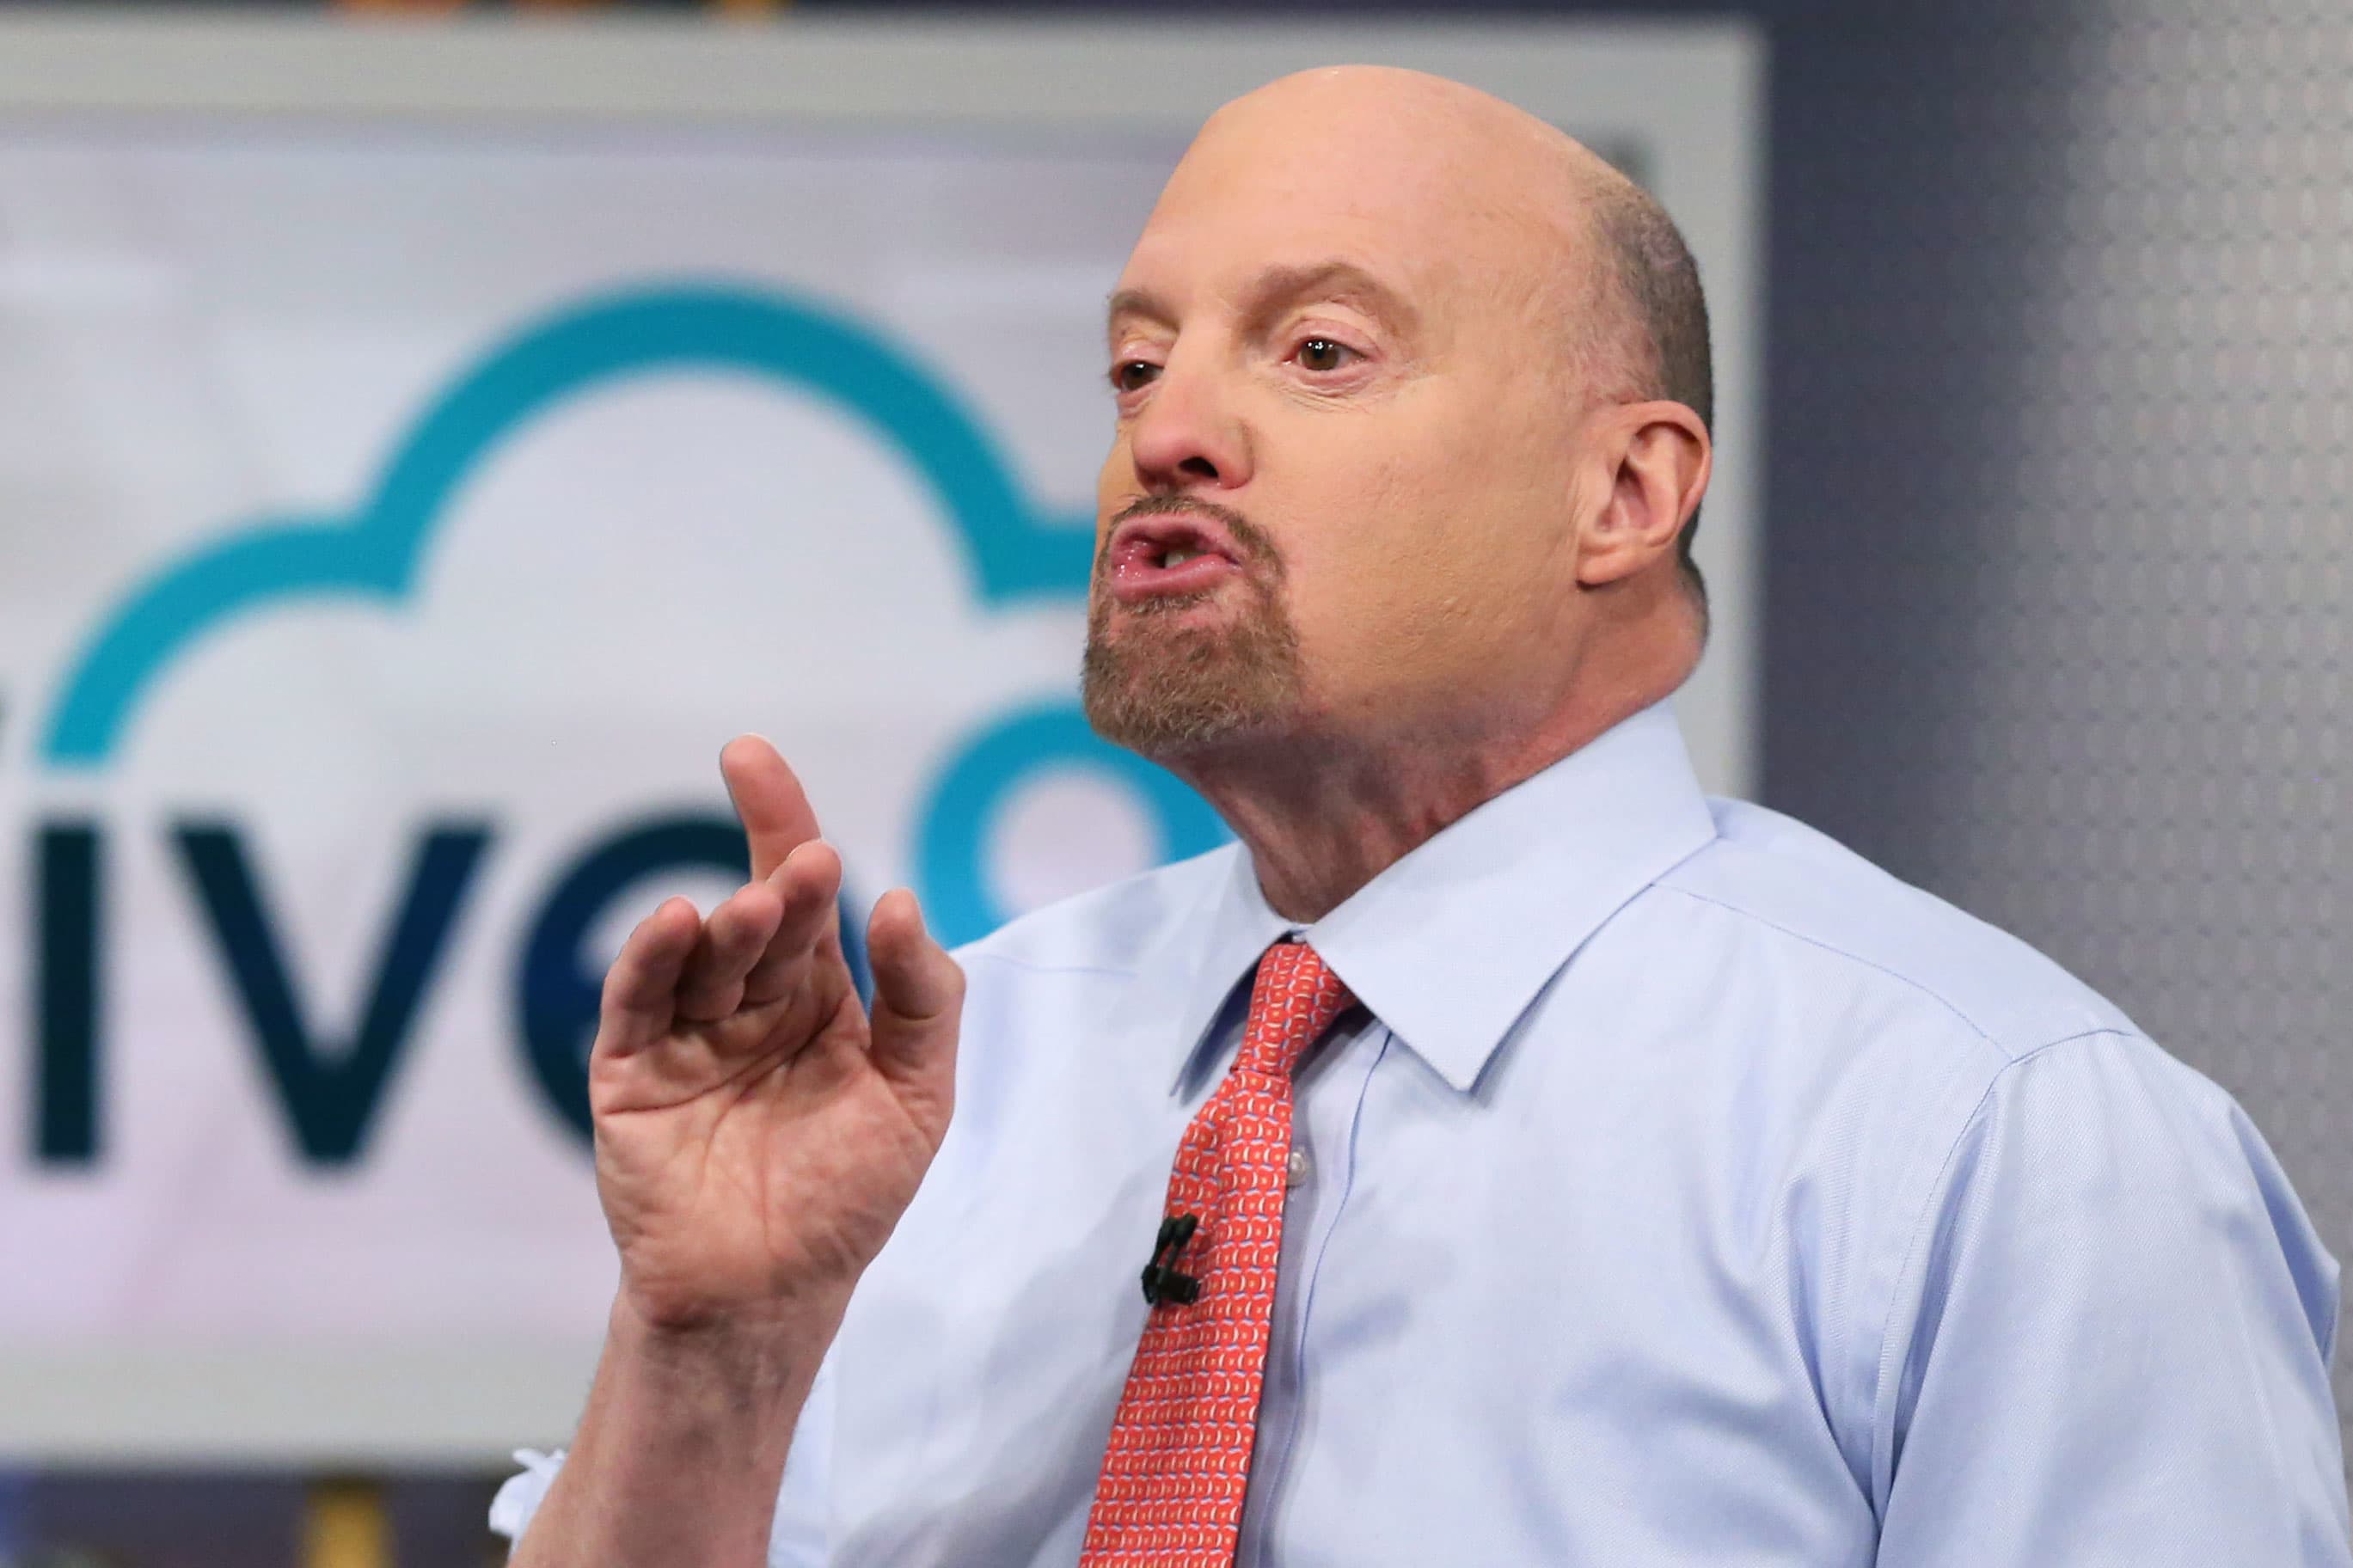 Cramer says stocks may bottom sooner than expected because Wall Street is so negative